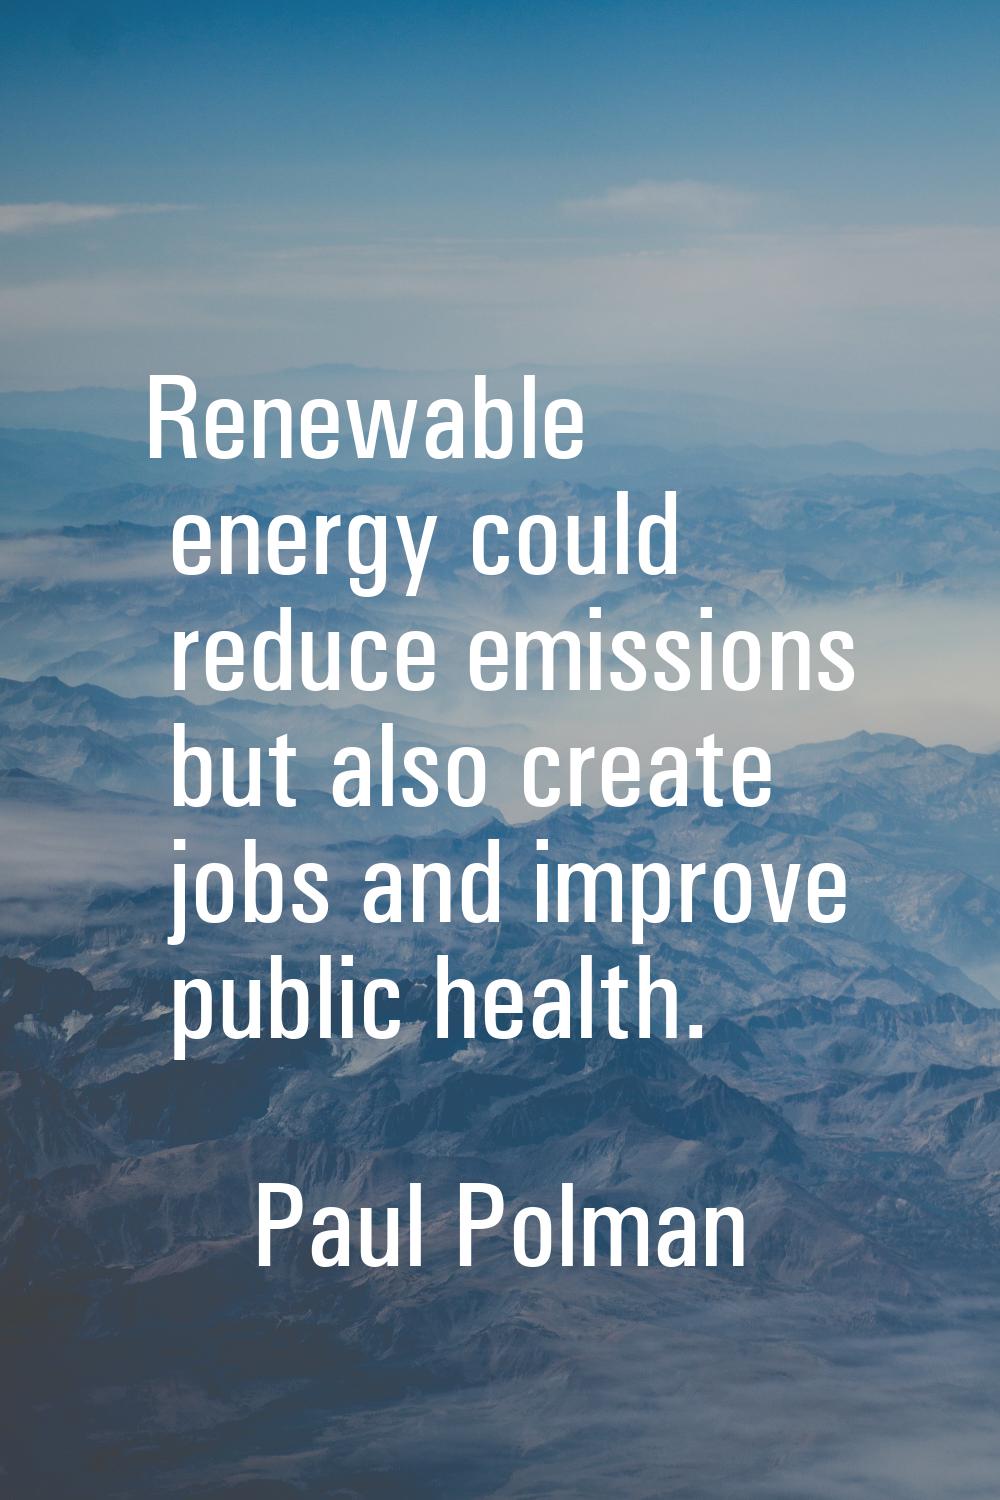 Renewable energy could reduce emissions but also create jobs and improve public health.